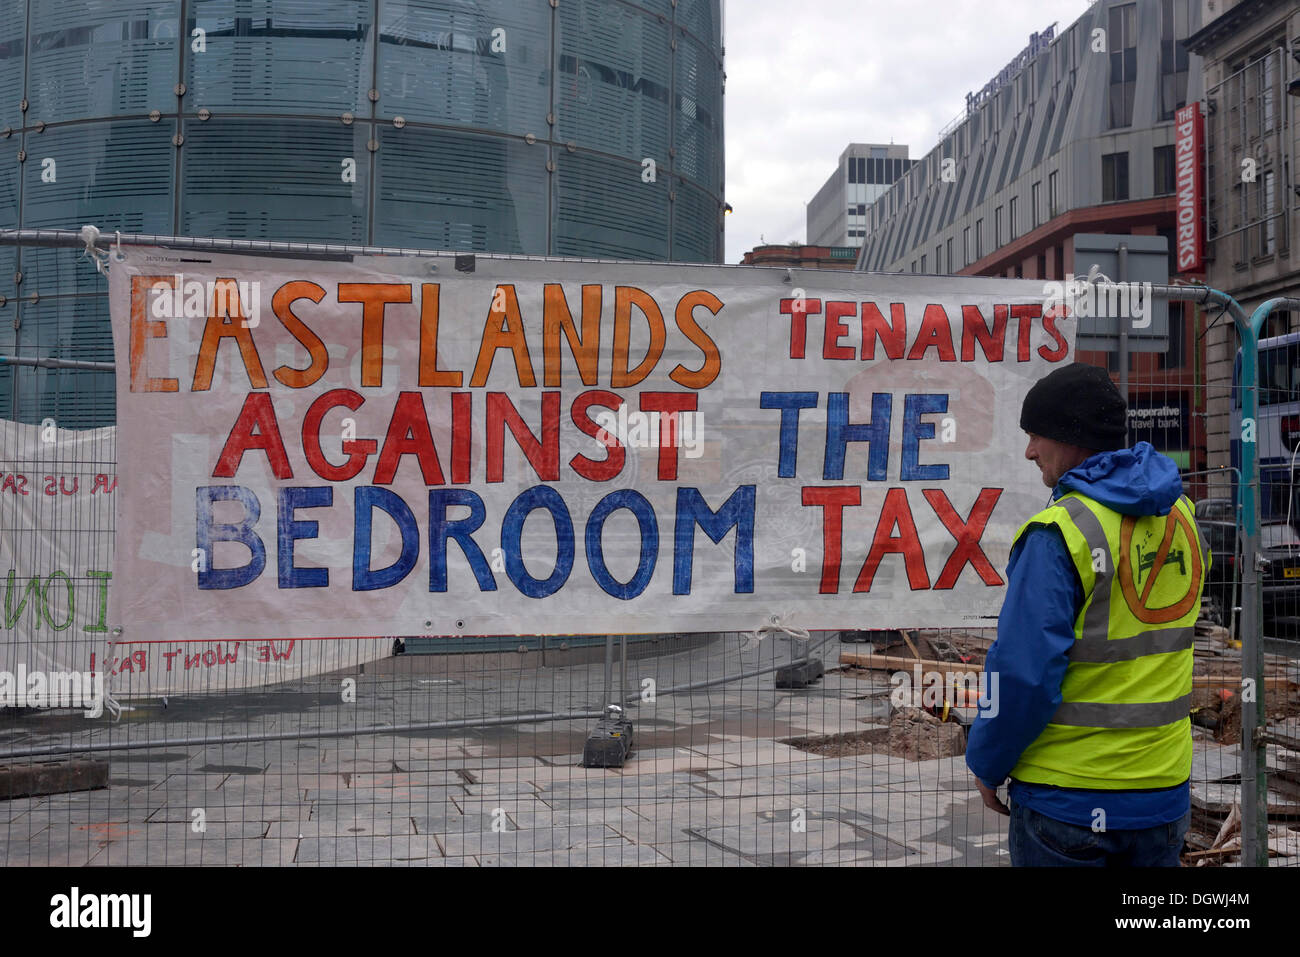 Manchester, UK. 26th Oct, 2013. A protester looks at a banner showing the displeasure of a small anti-Coalition Government group protesting against the bedroom tax and government measures, which are making the life of the ordinary citizen worse than before.  Credit:  John Fryer/Alamy Live News Stock Photo